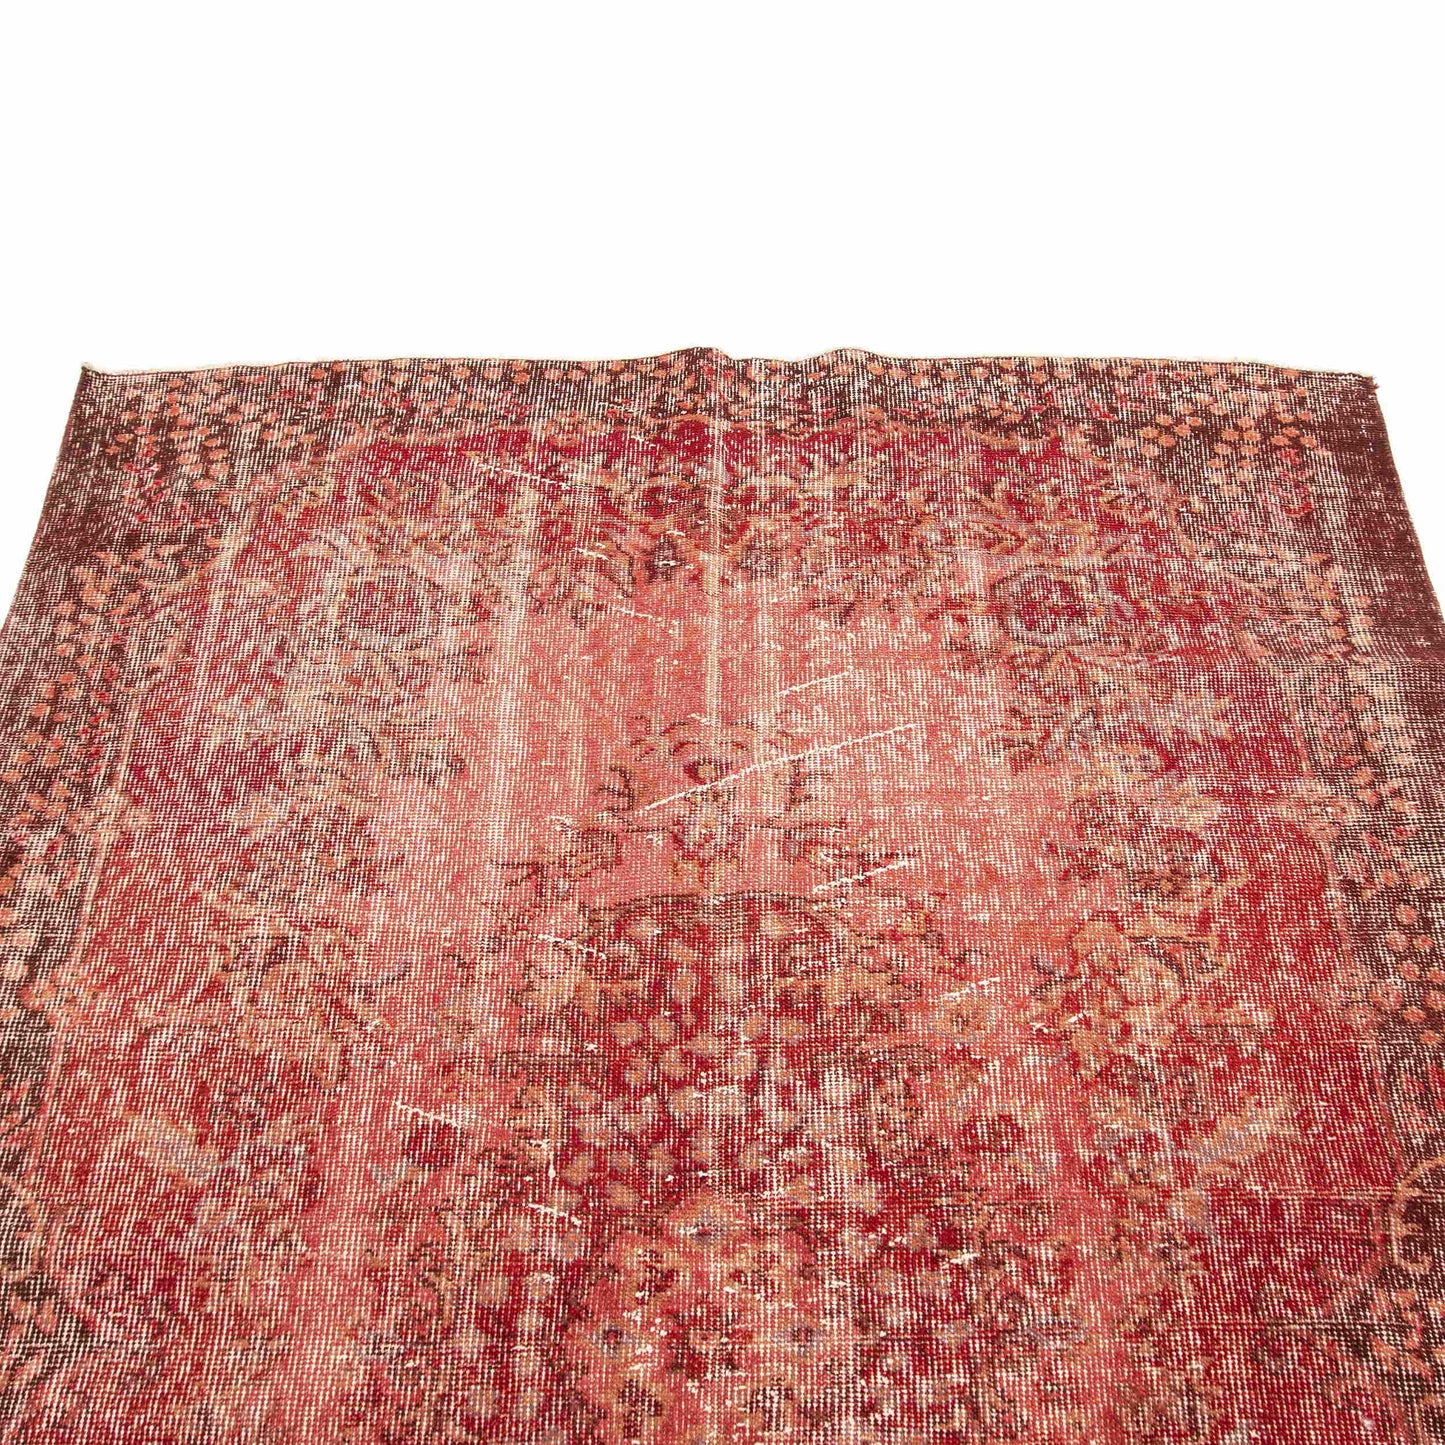 Oriental Rug Vintage Hand Knotted Wool On Cotton 144 x 221 Cm - 4' 9'' x 7' 4'' ER12